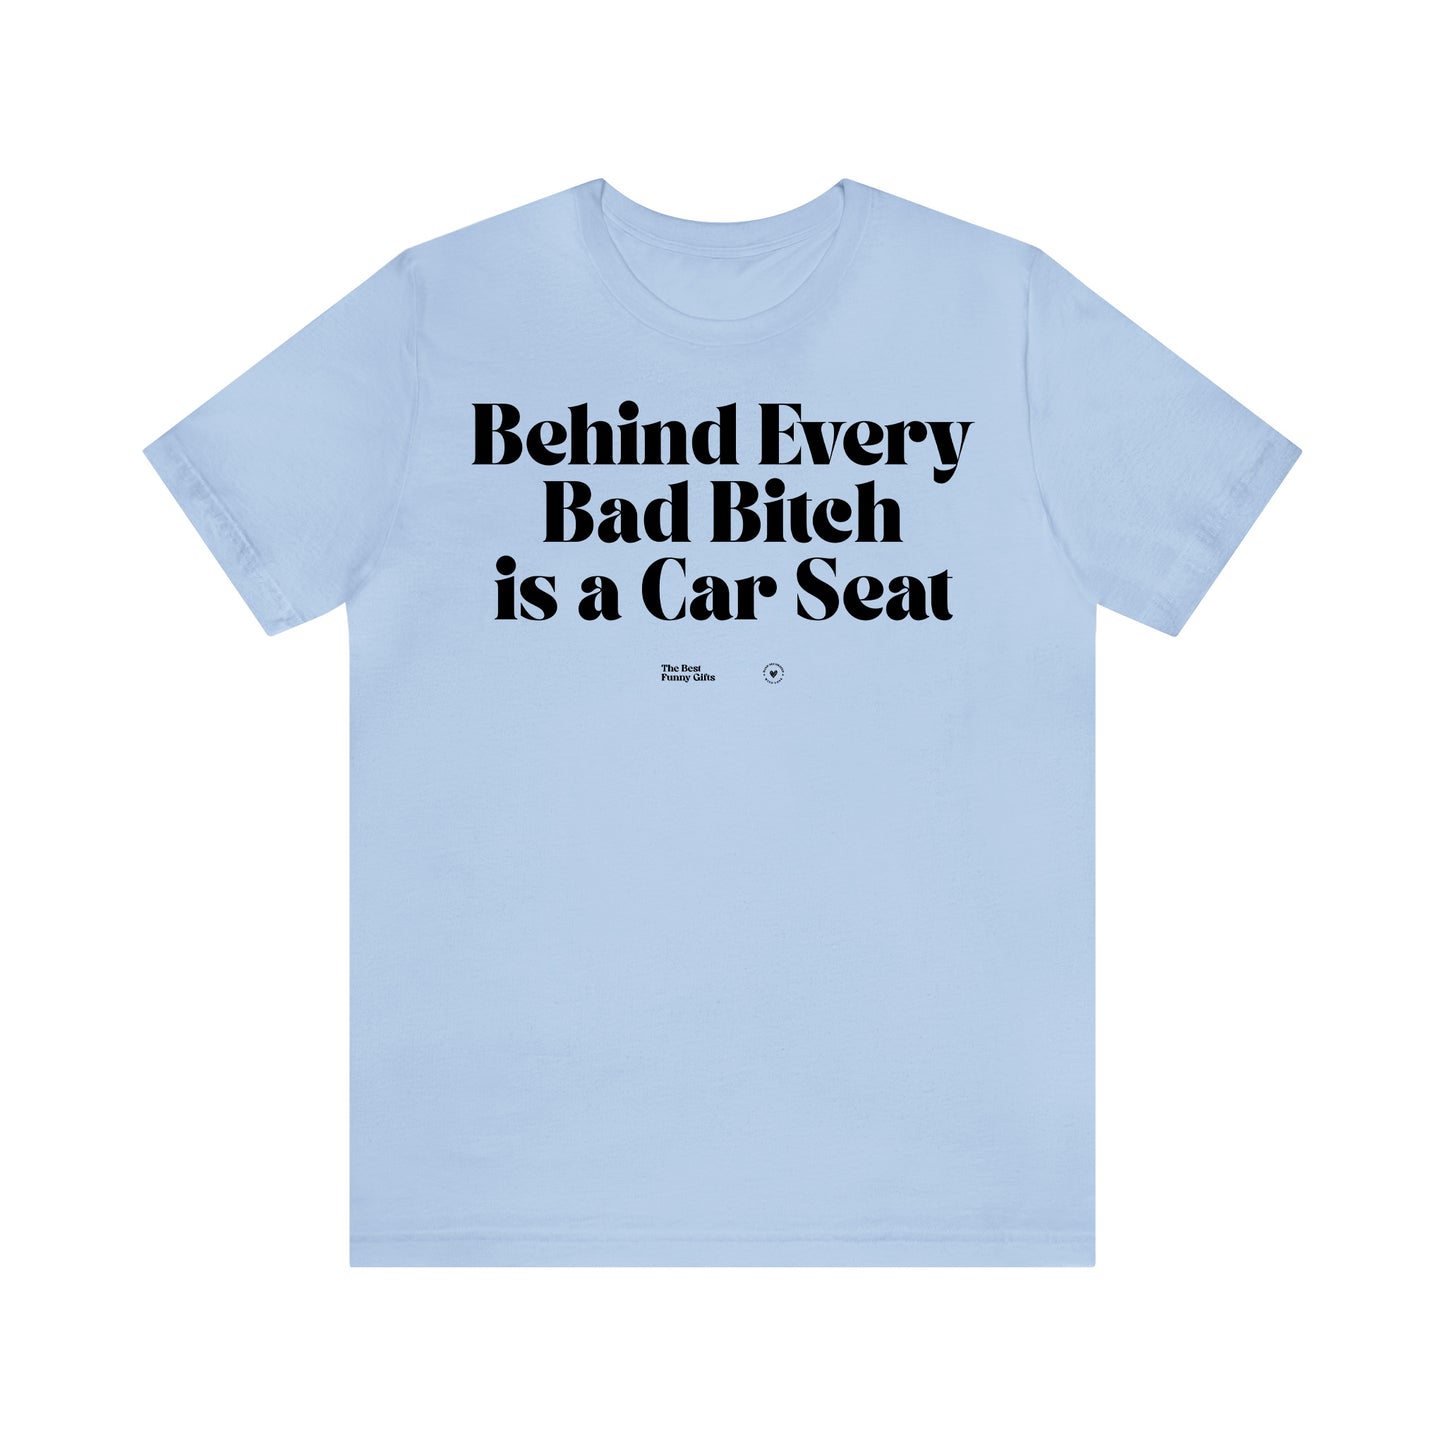 Funny Shirts for Women - Behind Every Bad Bitch is a Car Seat - Women’s T Shirts